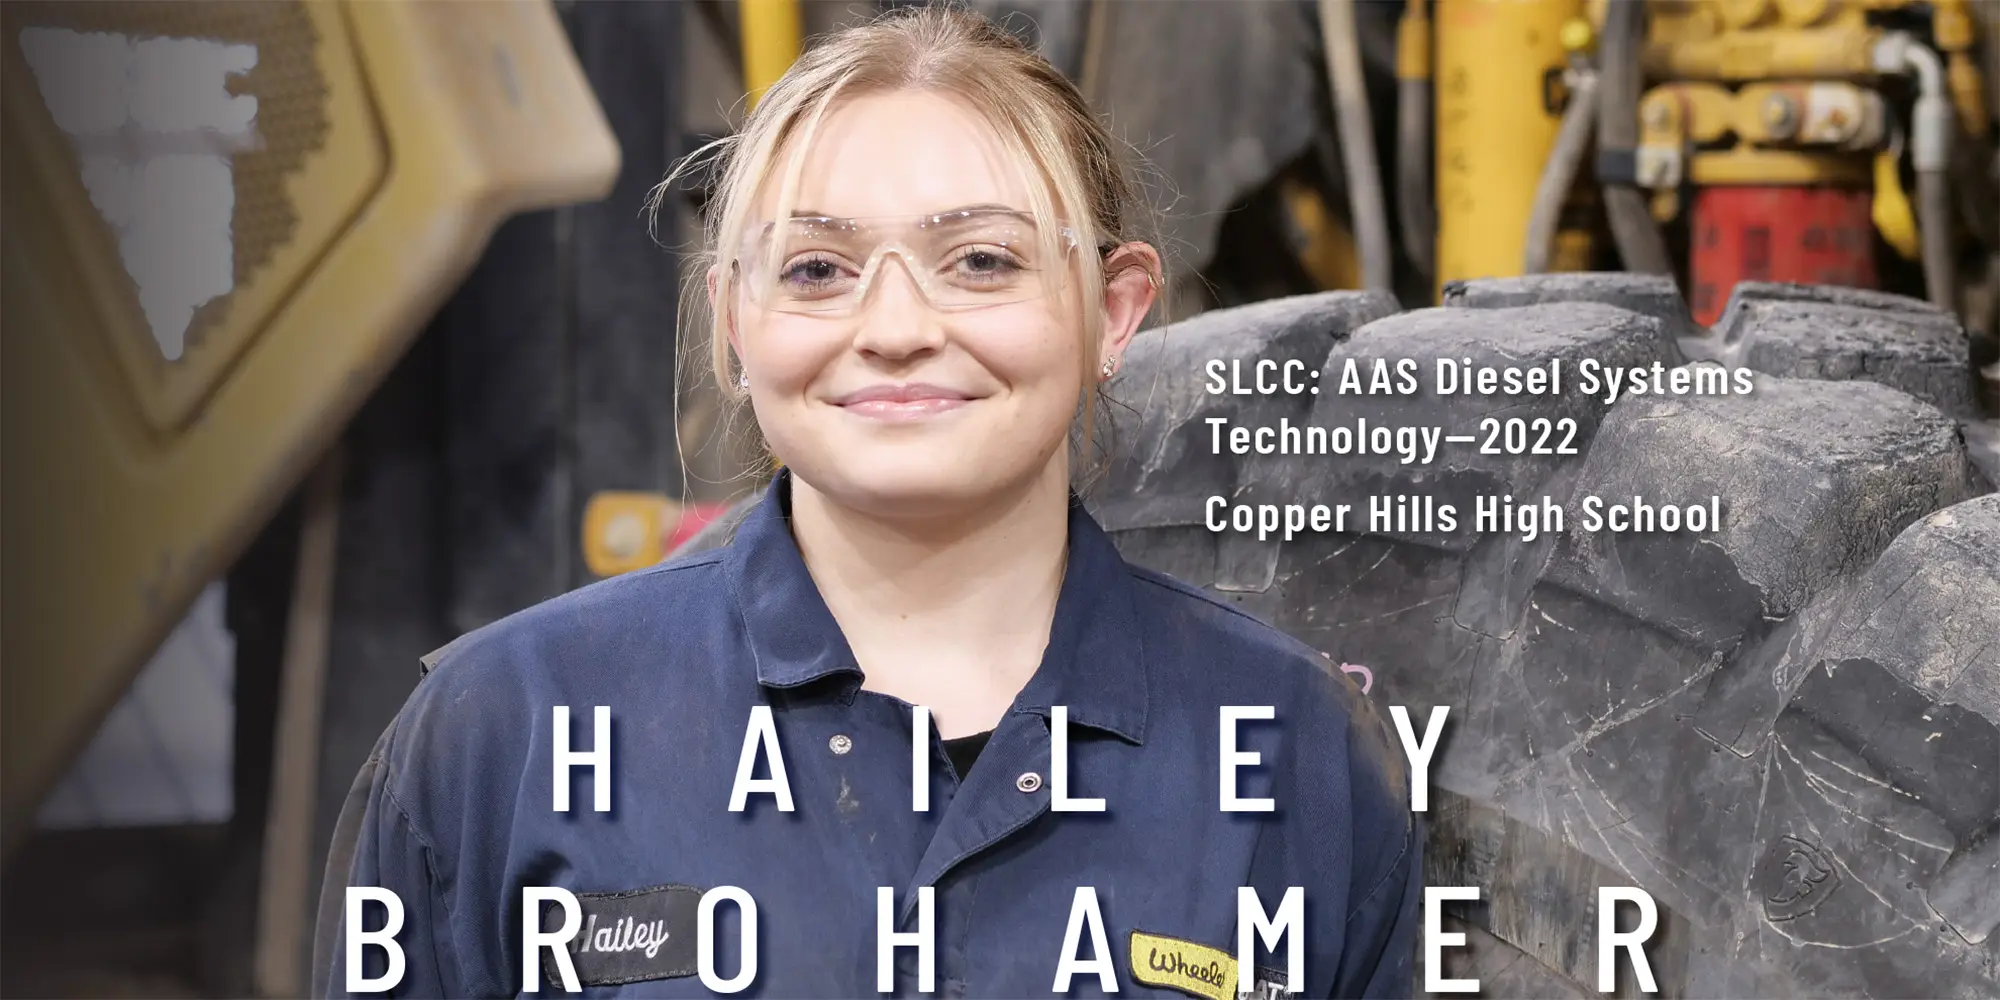 Hailey Brohamer, SLCC AAS Diesel Systems in 2022, From Copper Hills High School